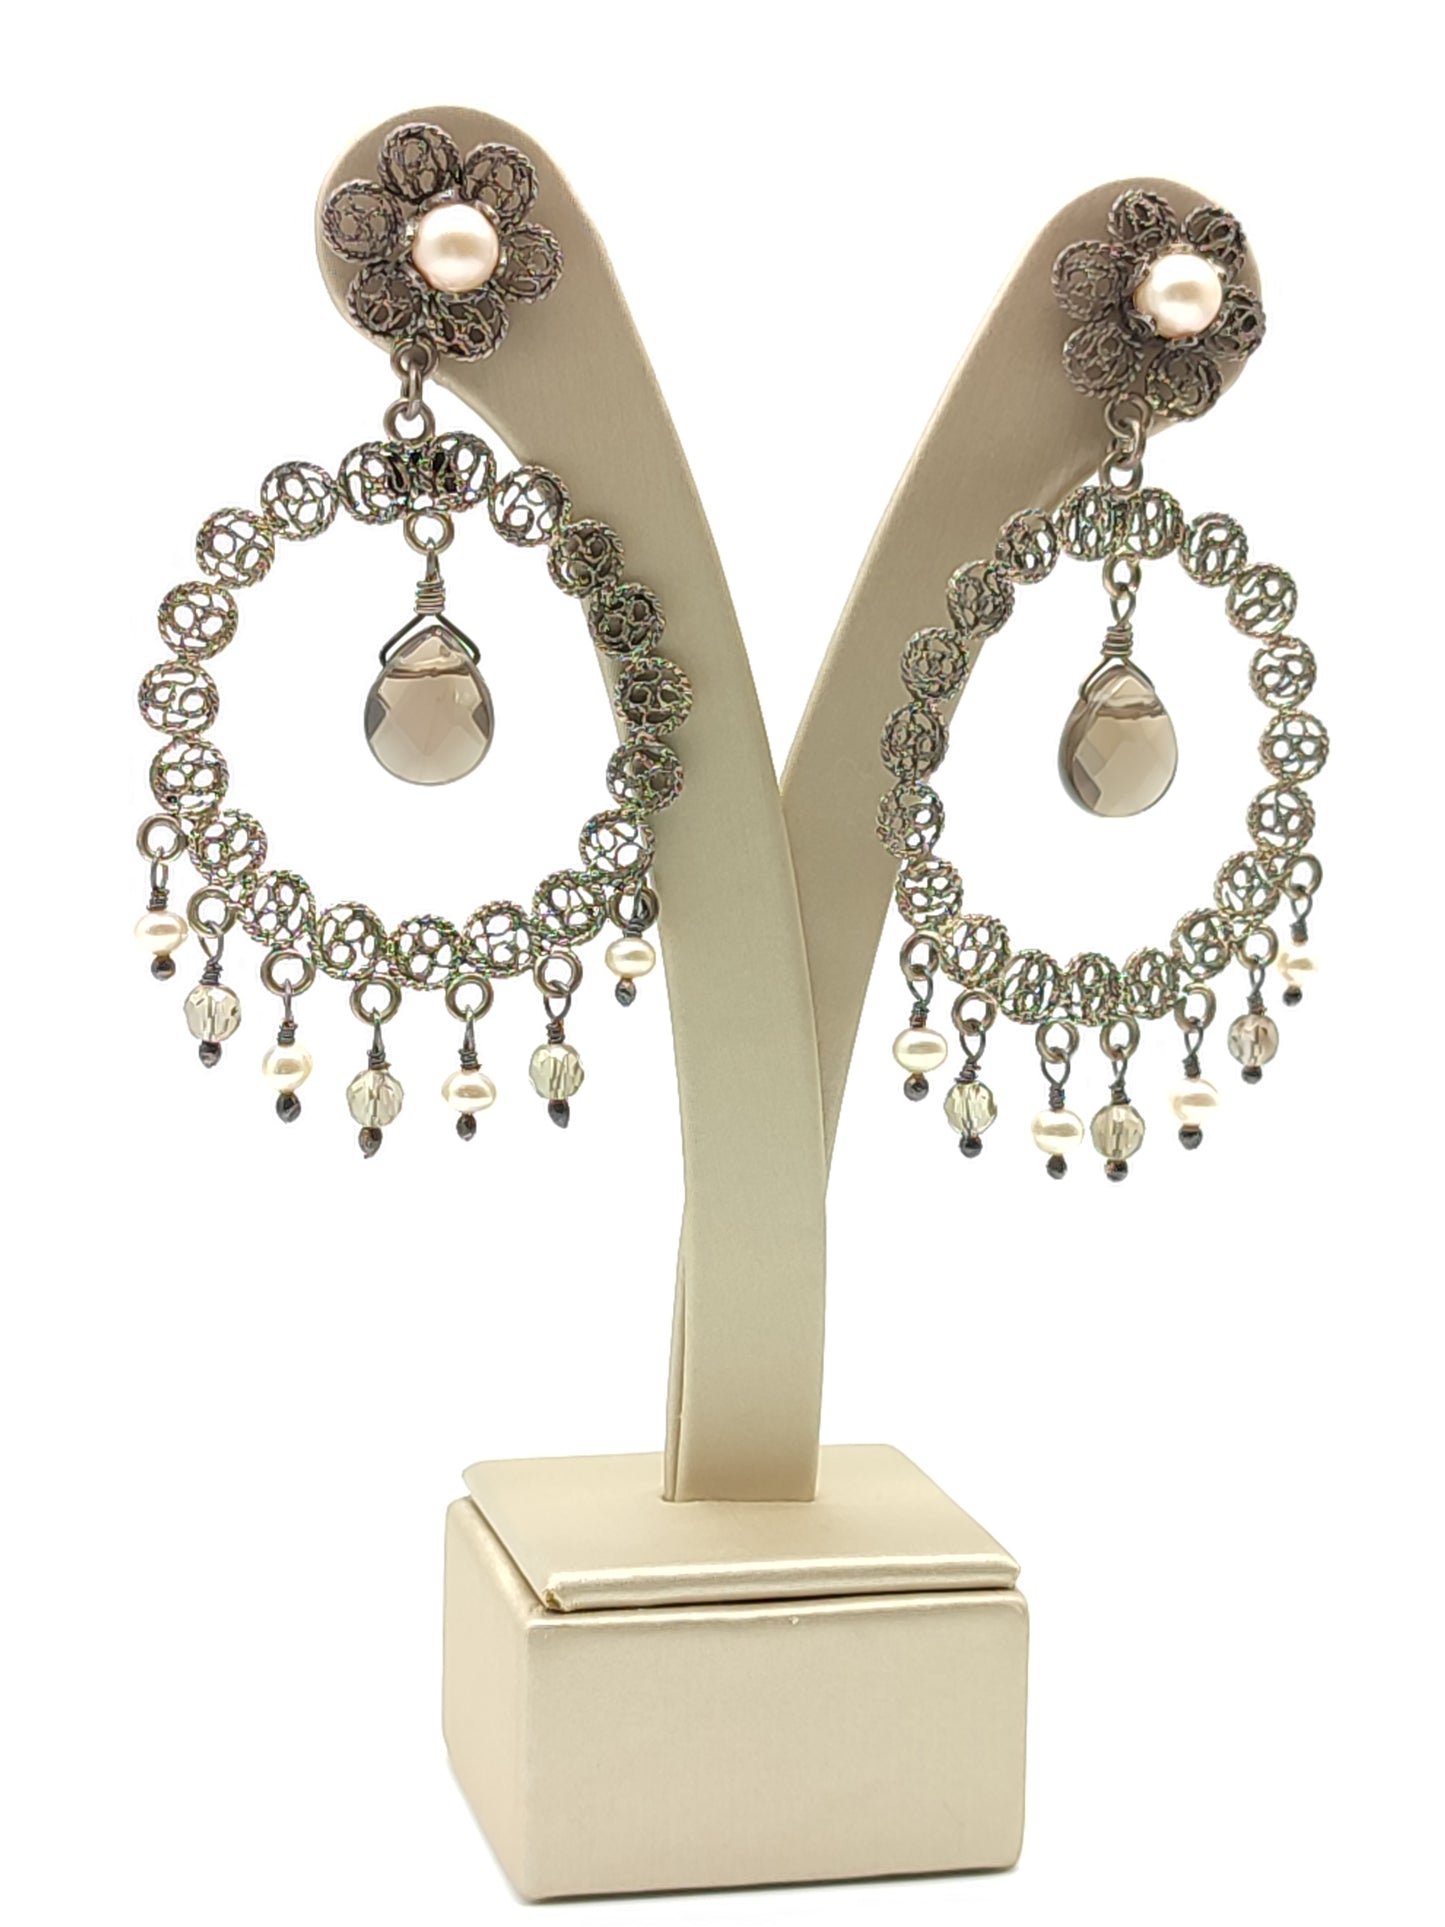 Silver filigree earrings with pearls and quartz